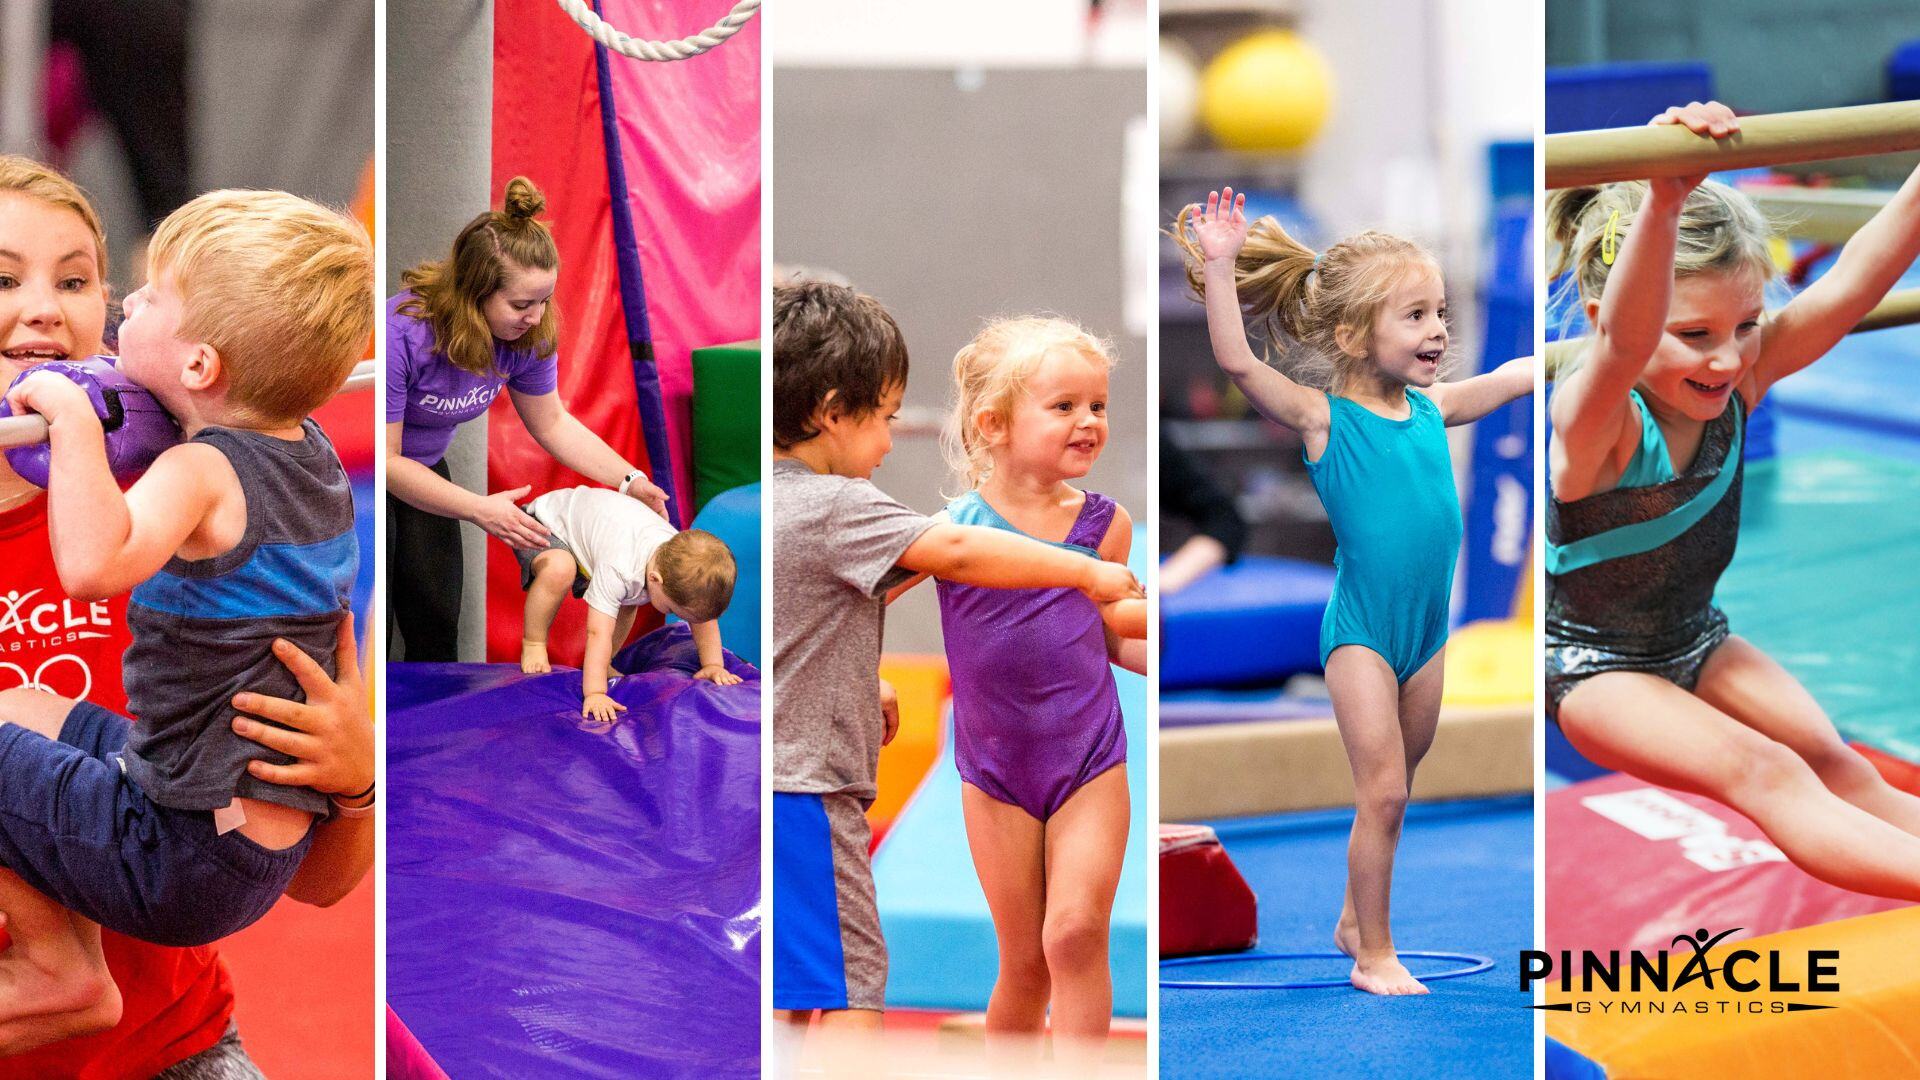 How Old Do You Need To Be To Take Gymnastics Classes?